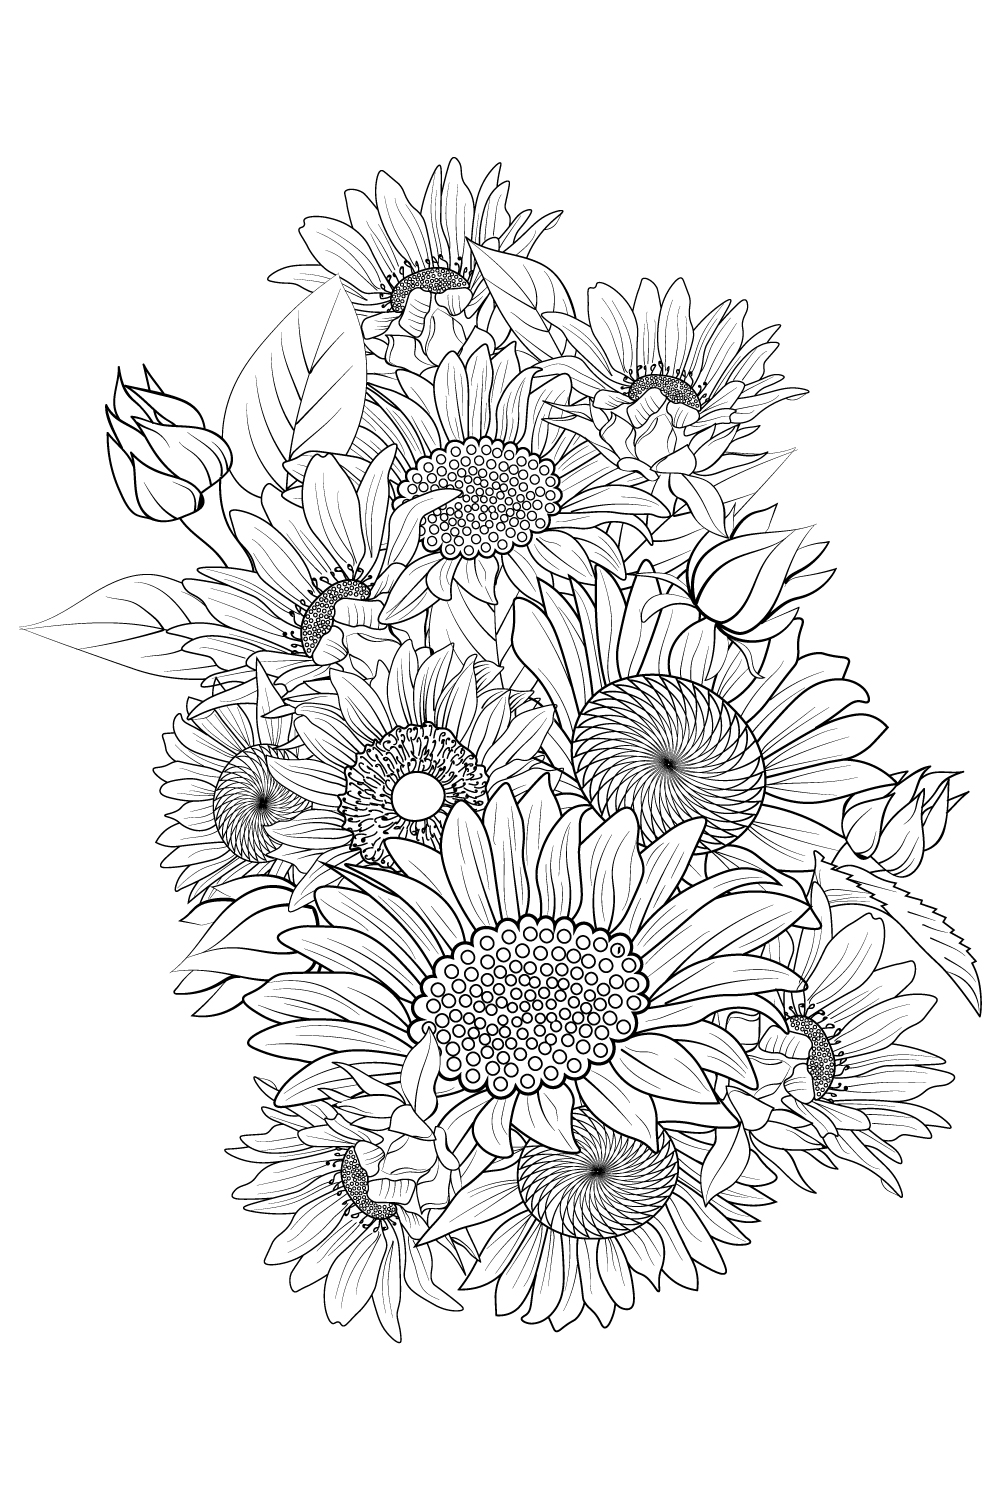 small sunflower drawing tattoo, sunflower tattoo black and white, black and white vintage sunflower tattoo, realistic black and grey sunflower tattoo, outline sunflower tattoo drawing, line drawing outline sunflower, stencil sunflower tattoo outline pinterest preview image.